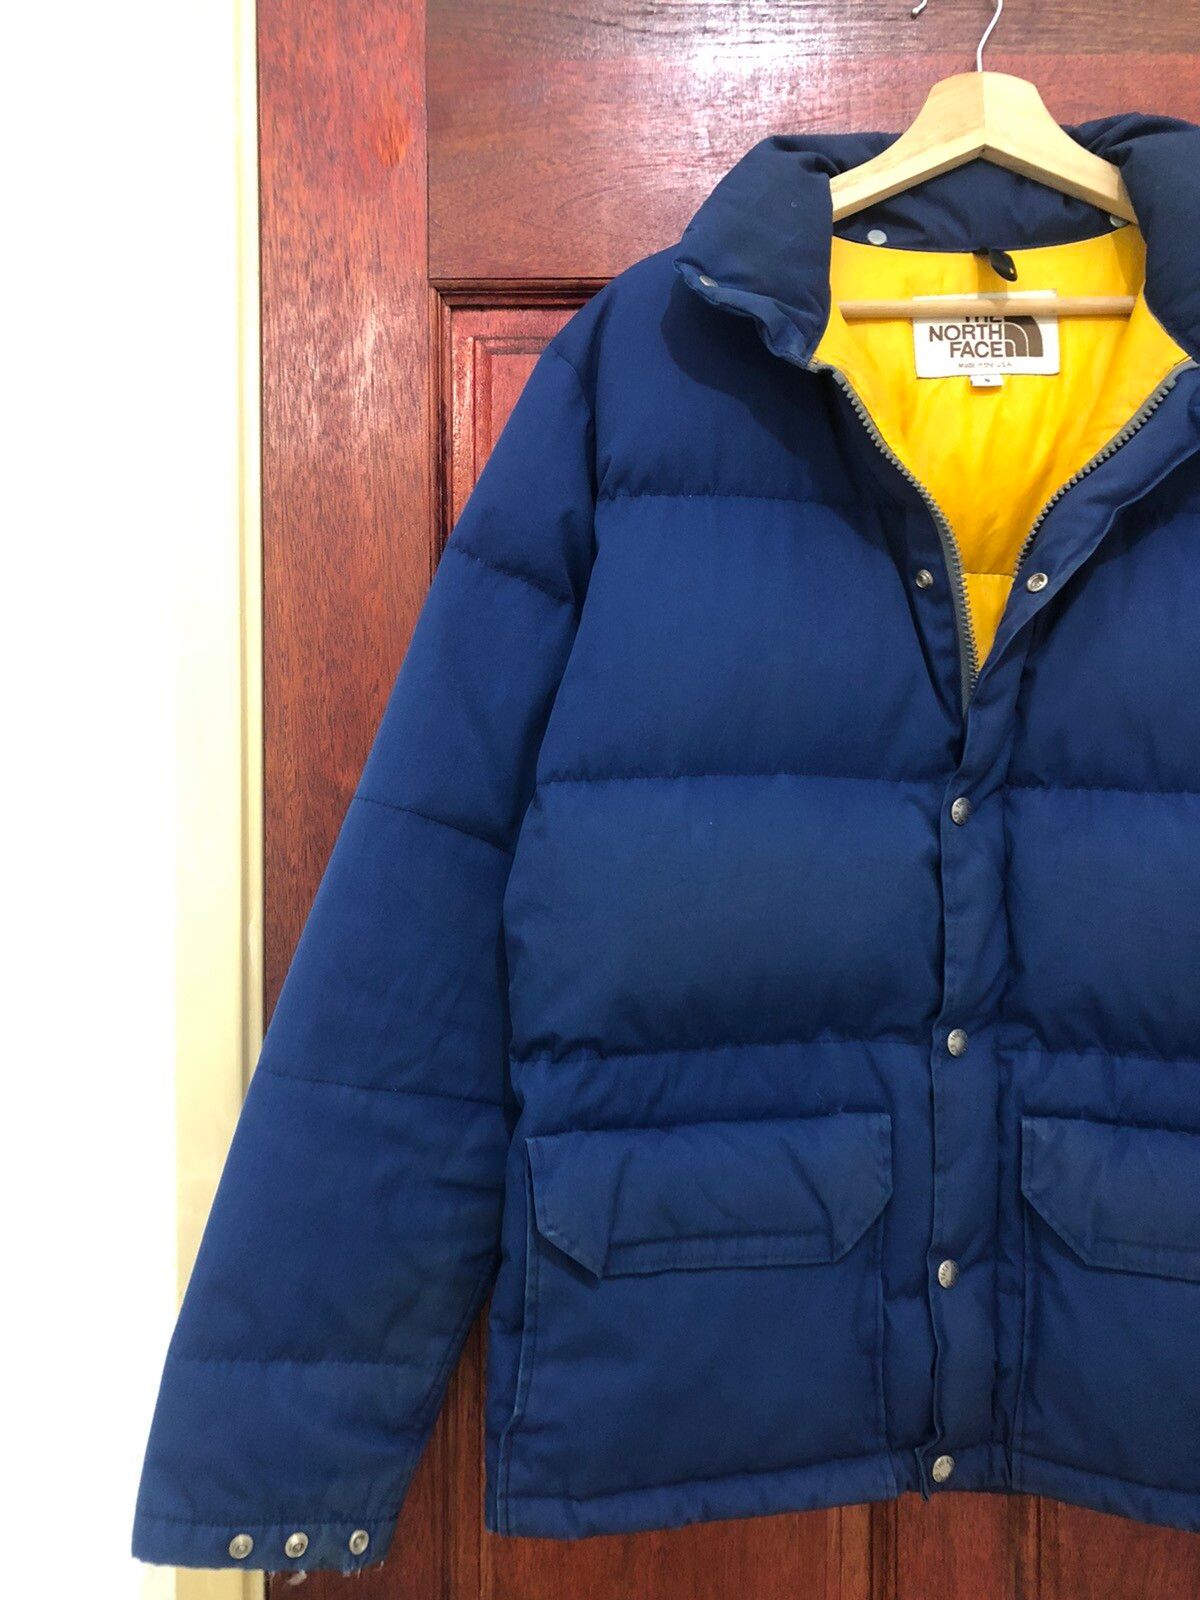 Vintage 90s The North Face Puffer Jacket - 5